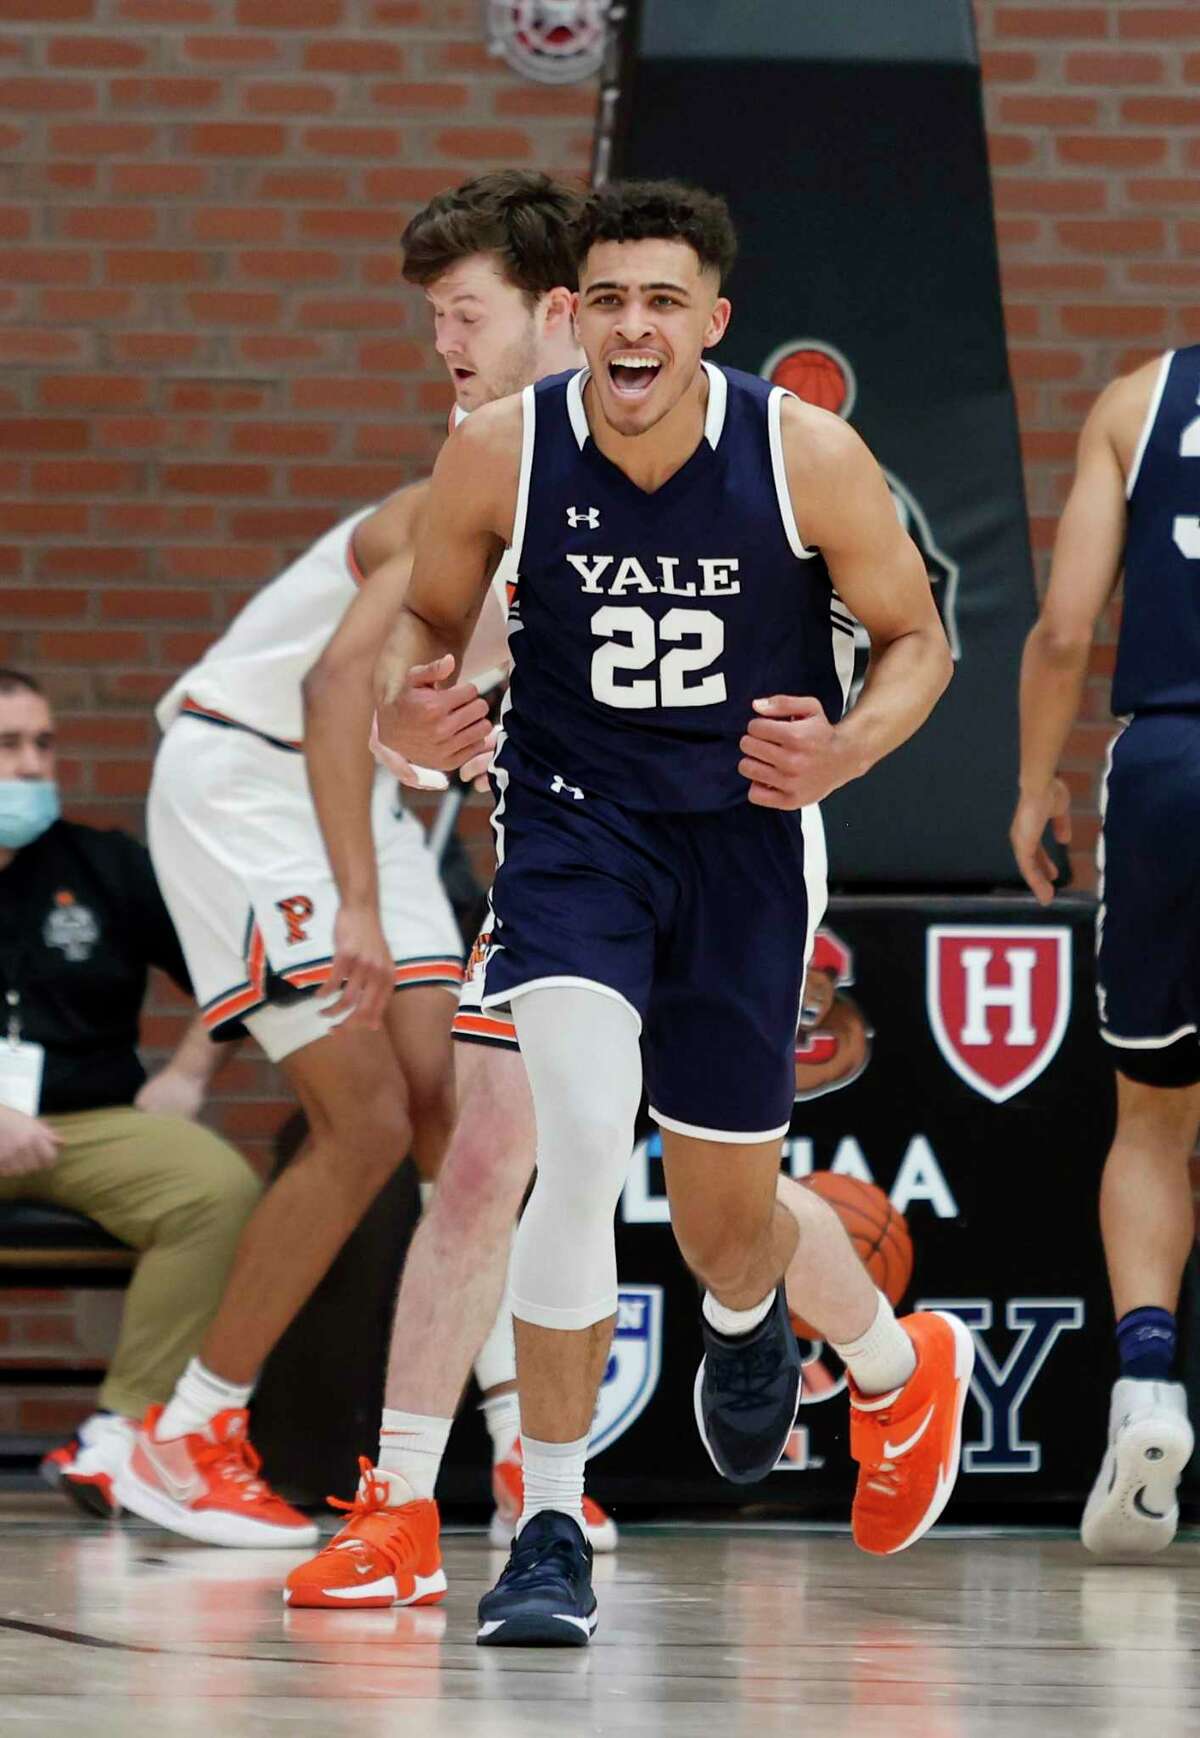 Yale’s Matt Knowling reacts after making a basket against Princeton during the first half of the Ivy League championship game on Sunday.